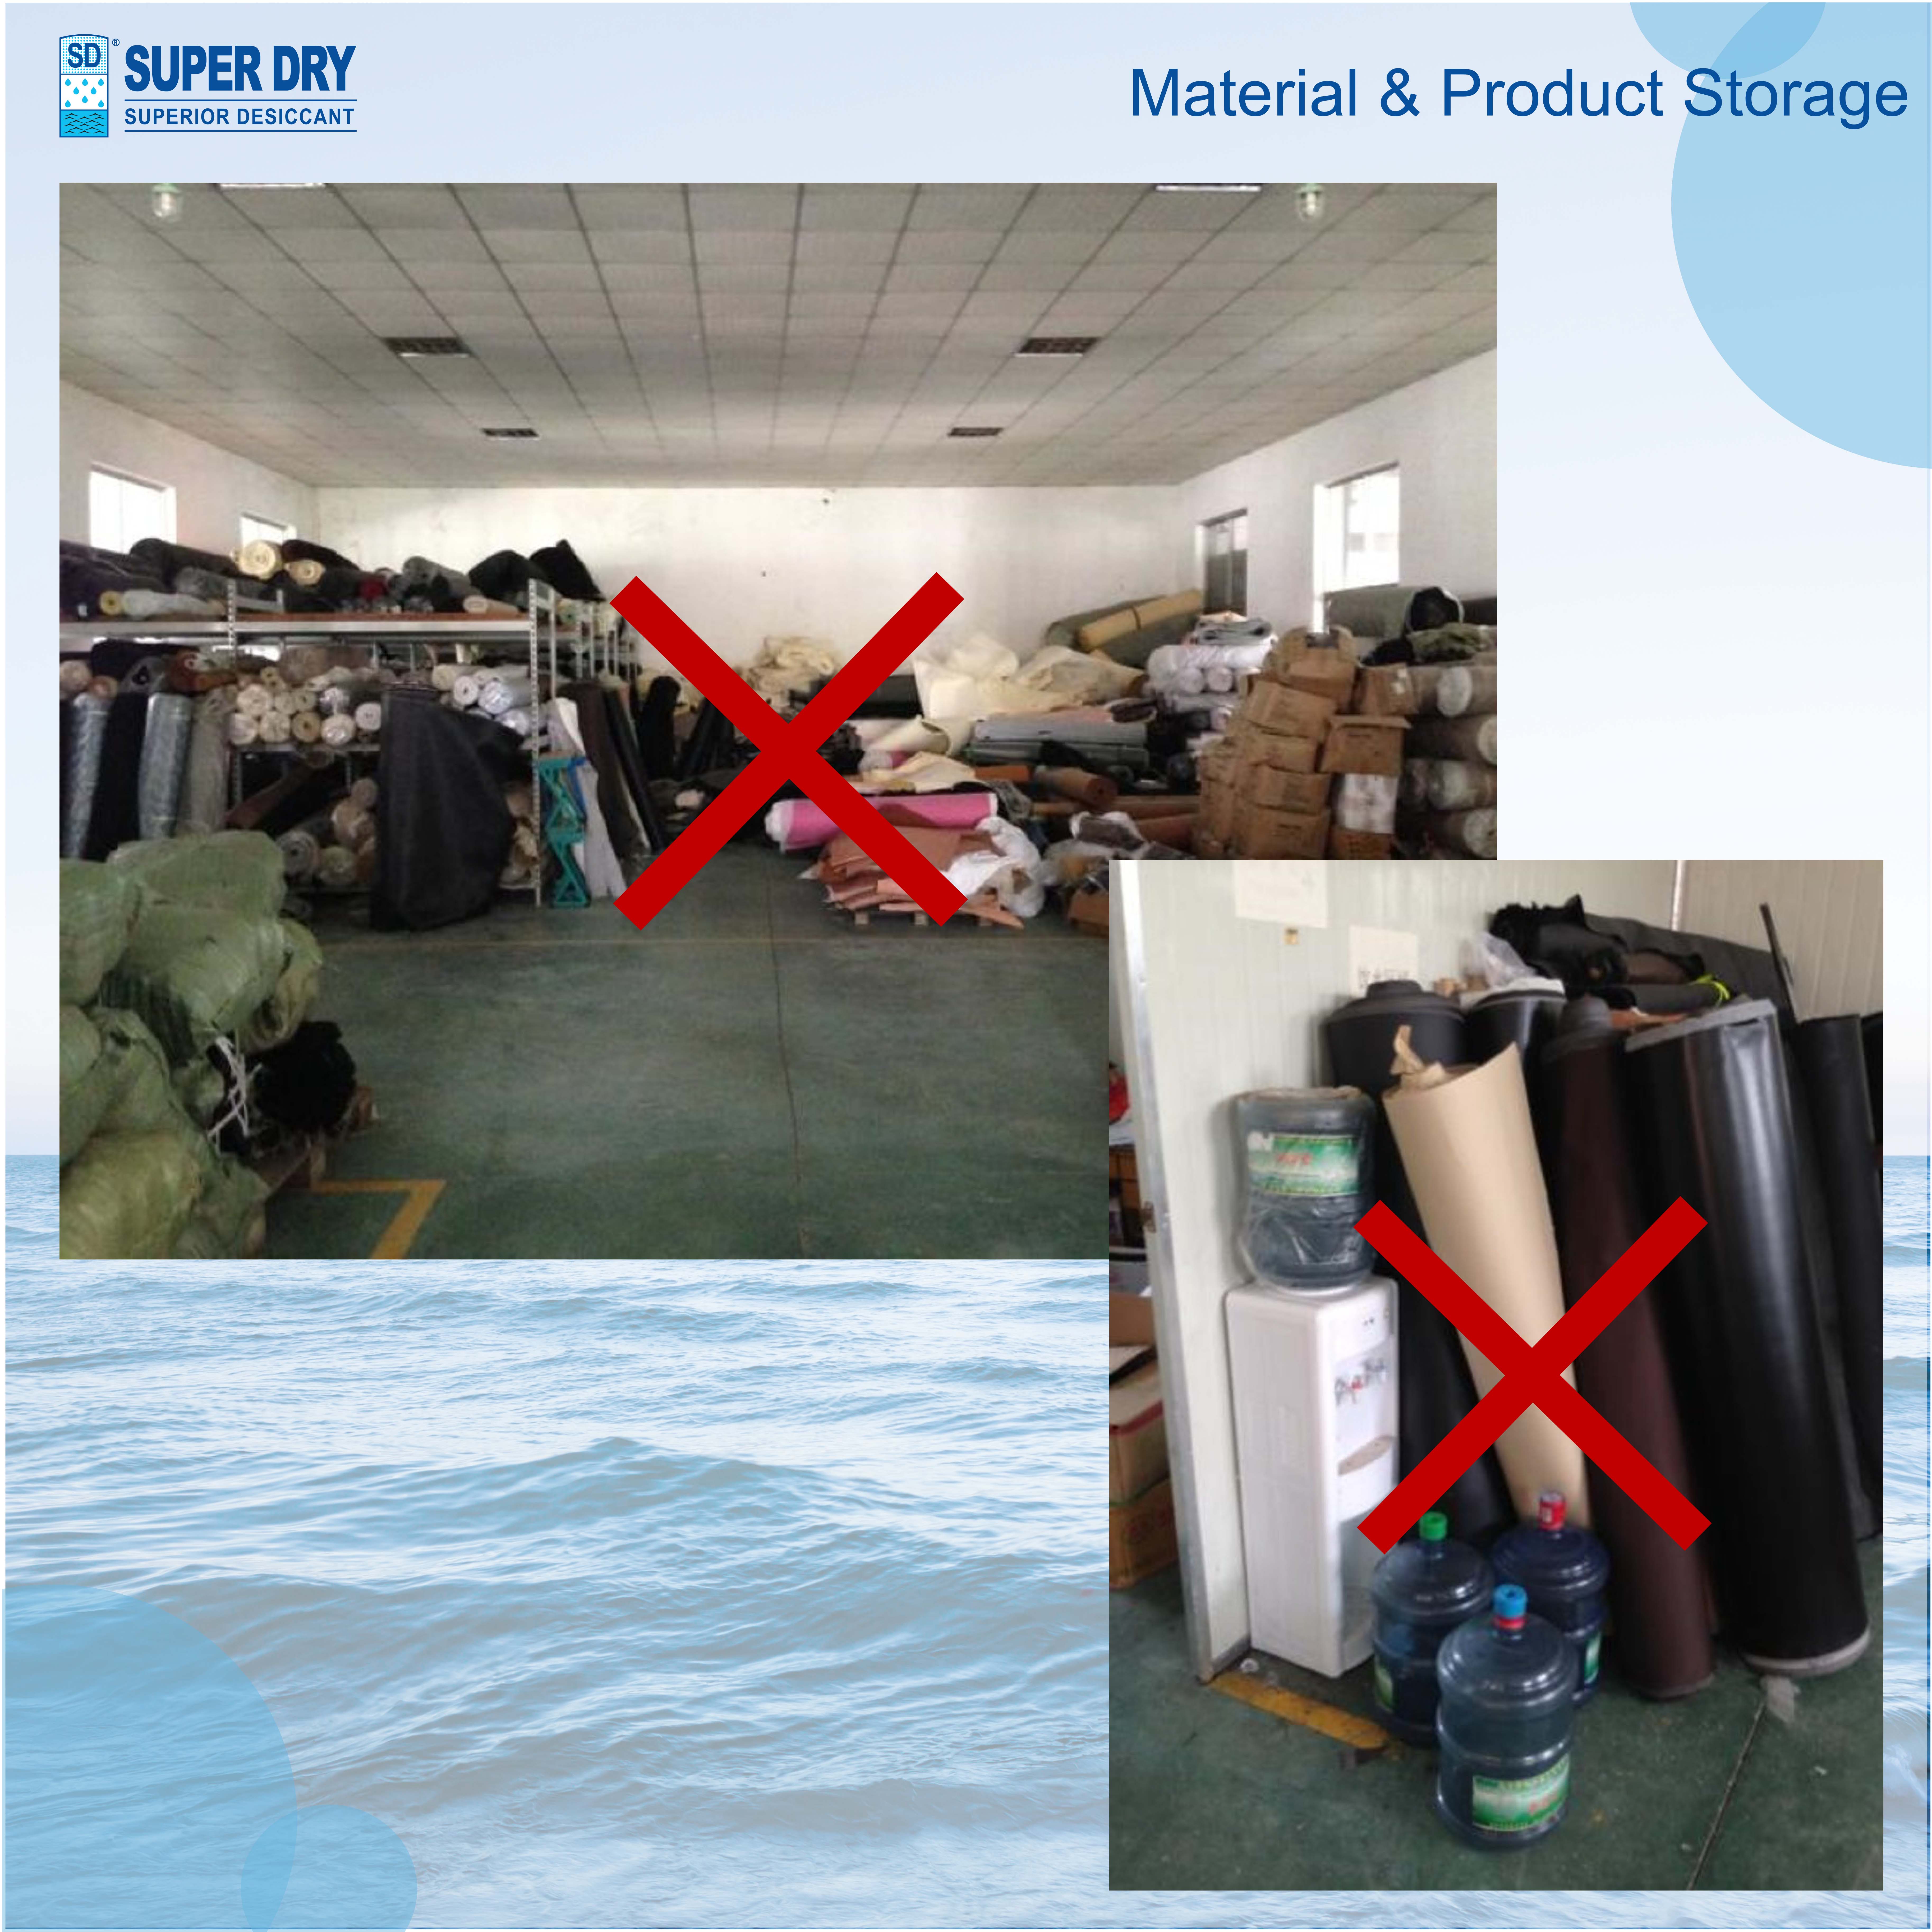 #Material & Product Storage